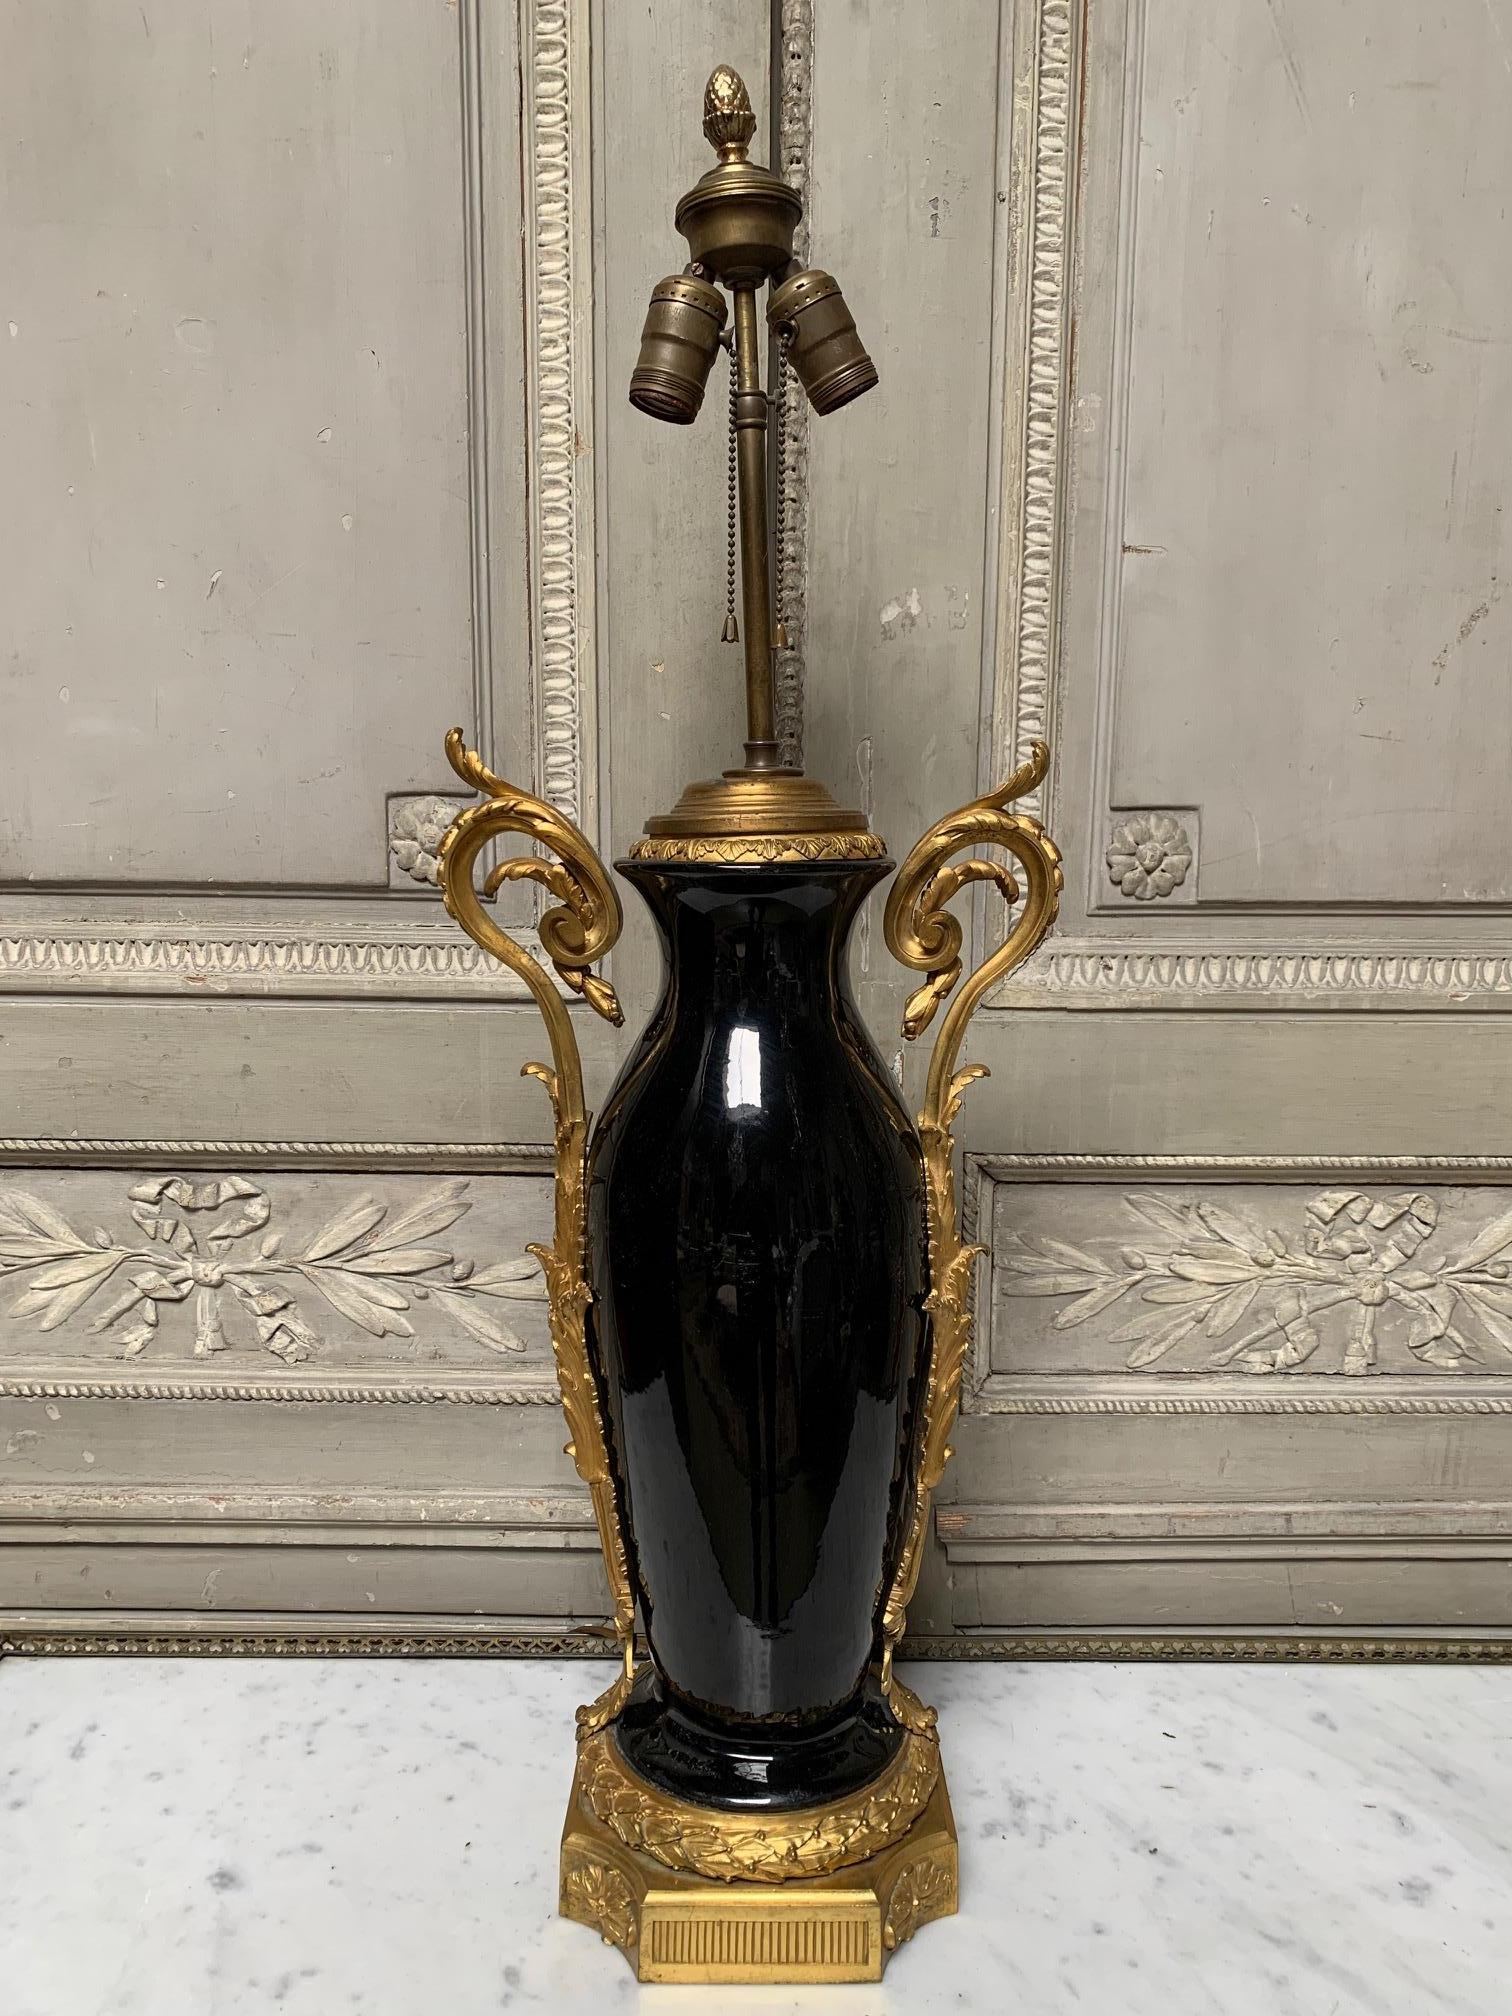 A 19th century French gilt bronze mounted black porcelain lamp base in the Louis XVI style. The bronze fittings are very fine quality and scale. This is a beautiful lamp that would work in a variety of interiors. The height is to the top of the lamp